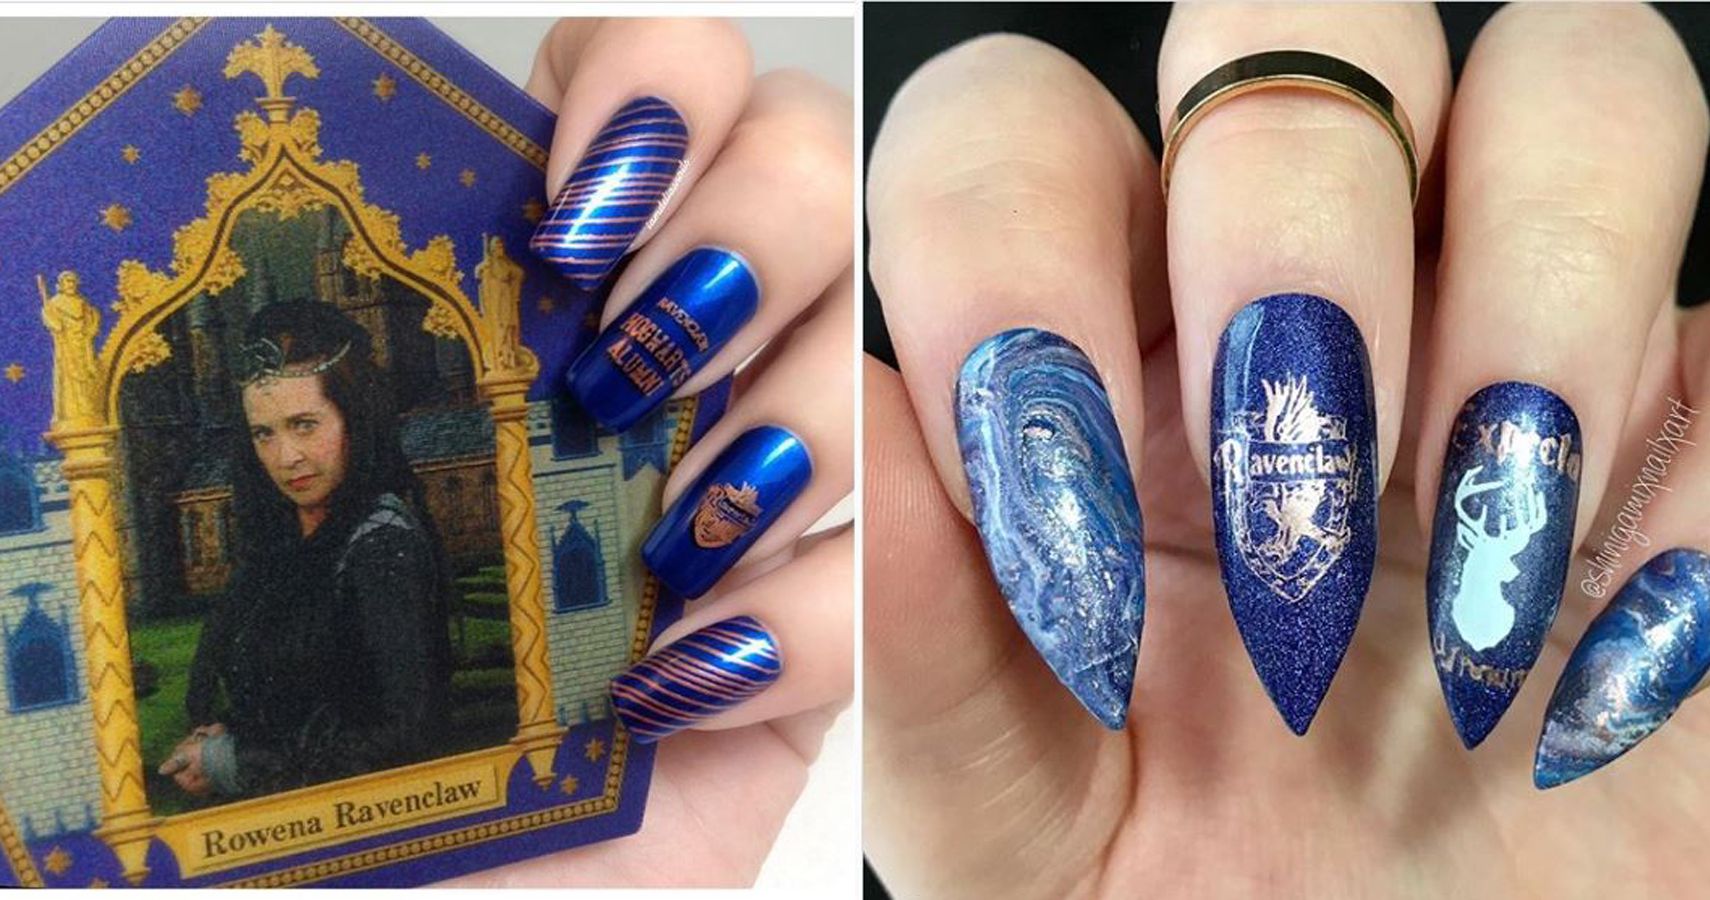 8. "Simple Harry Potter Nail Designs for Short Nails" - wide 8